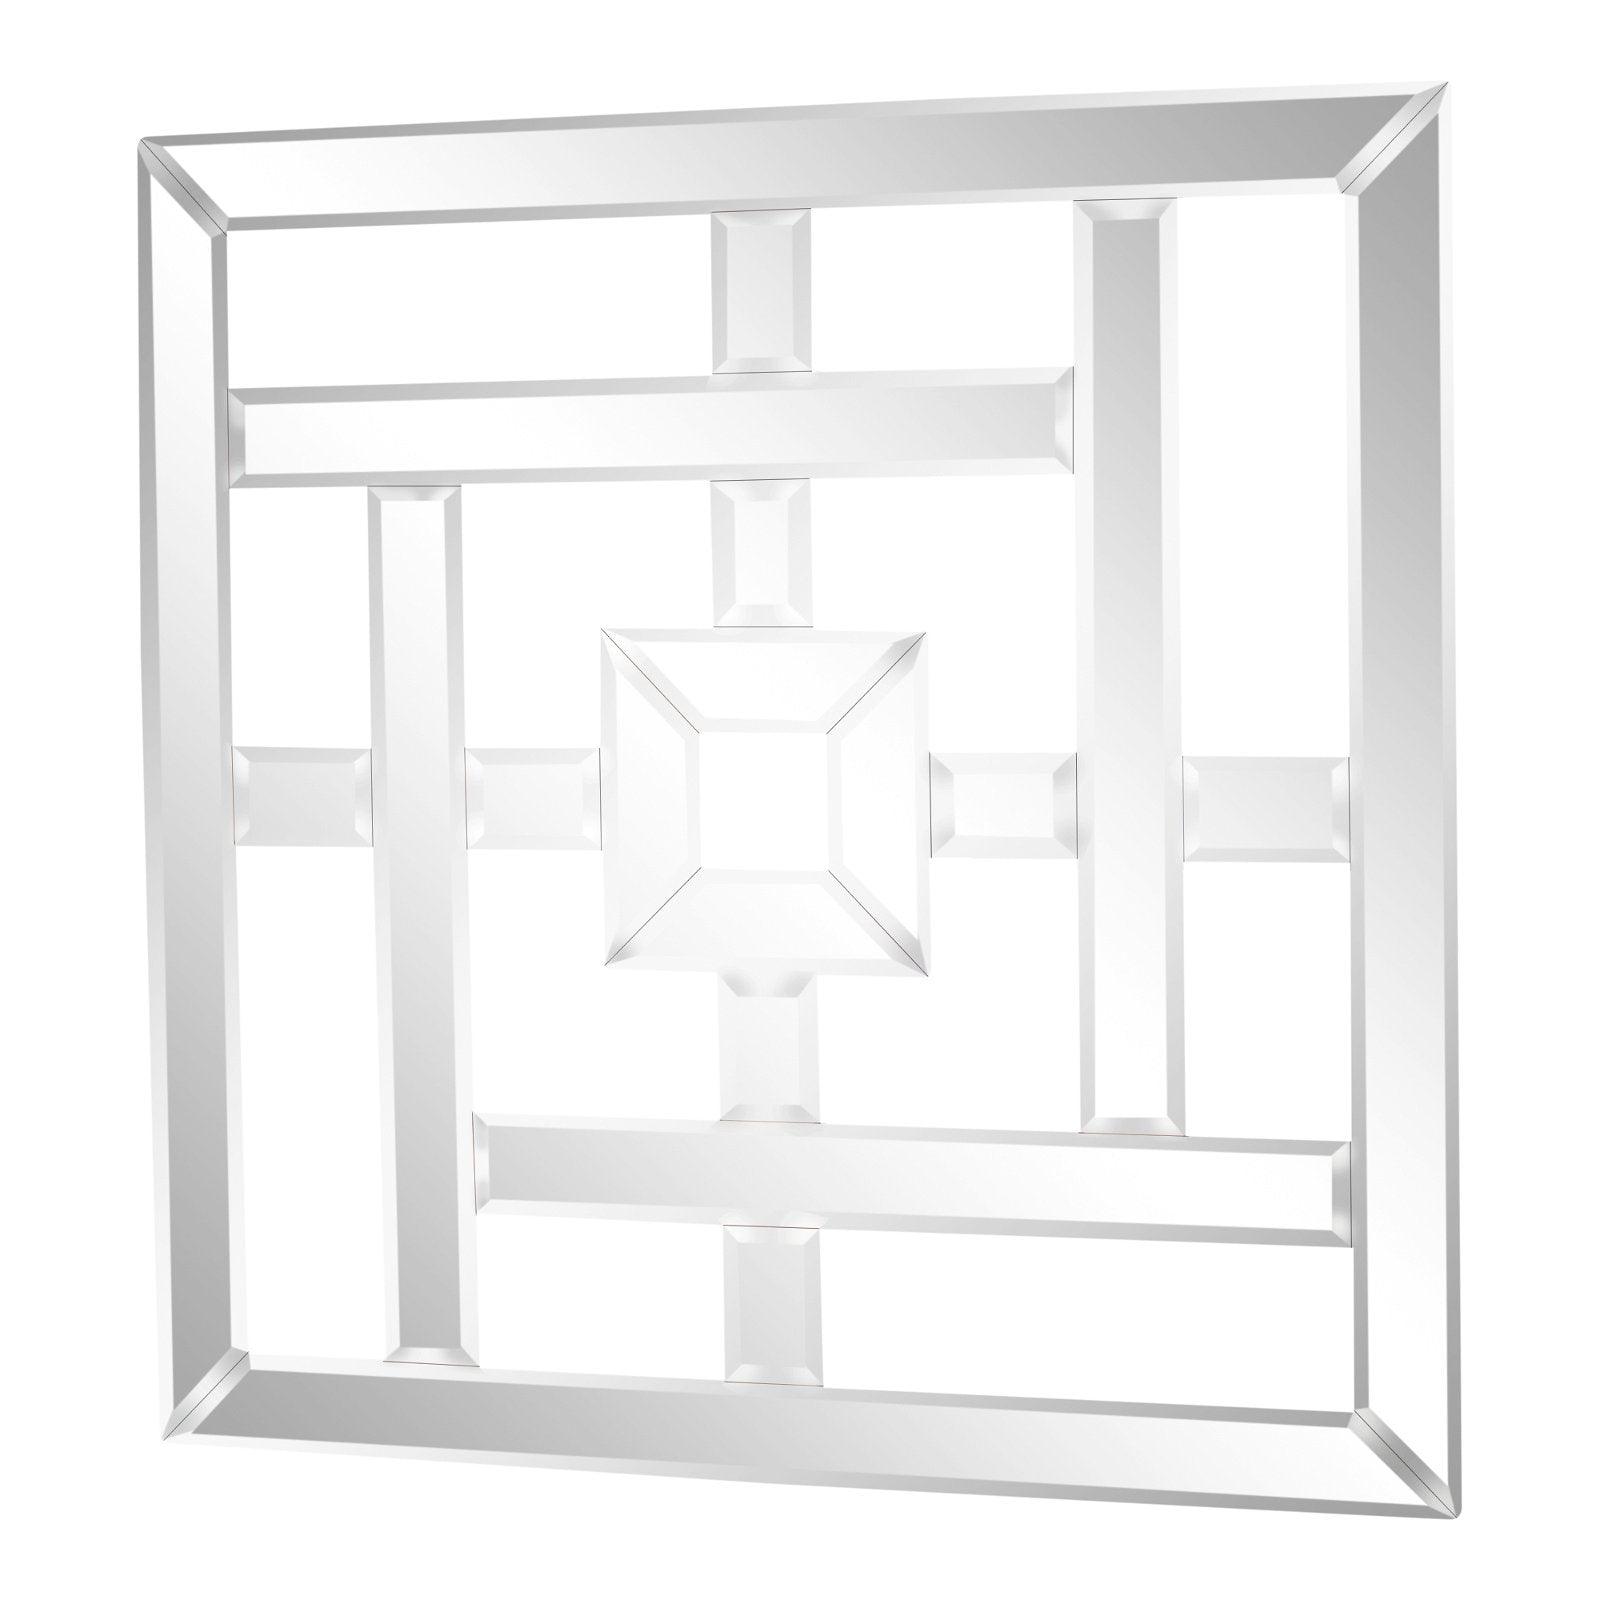 Mirrored Wall Decoration, 40cm.-Mirrors